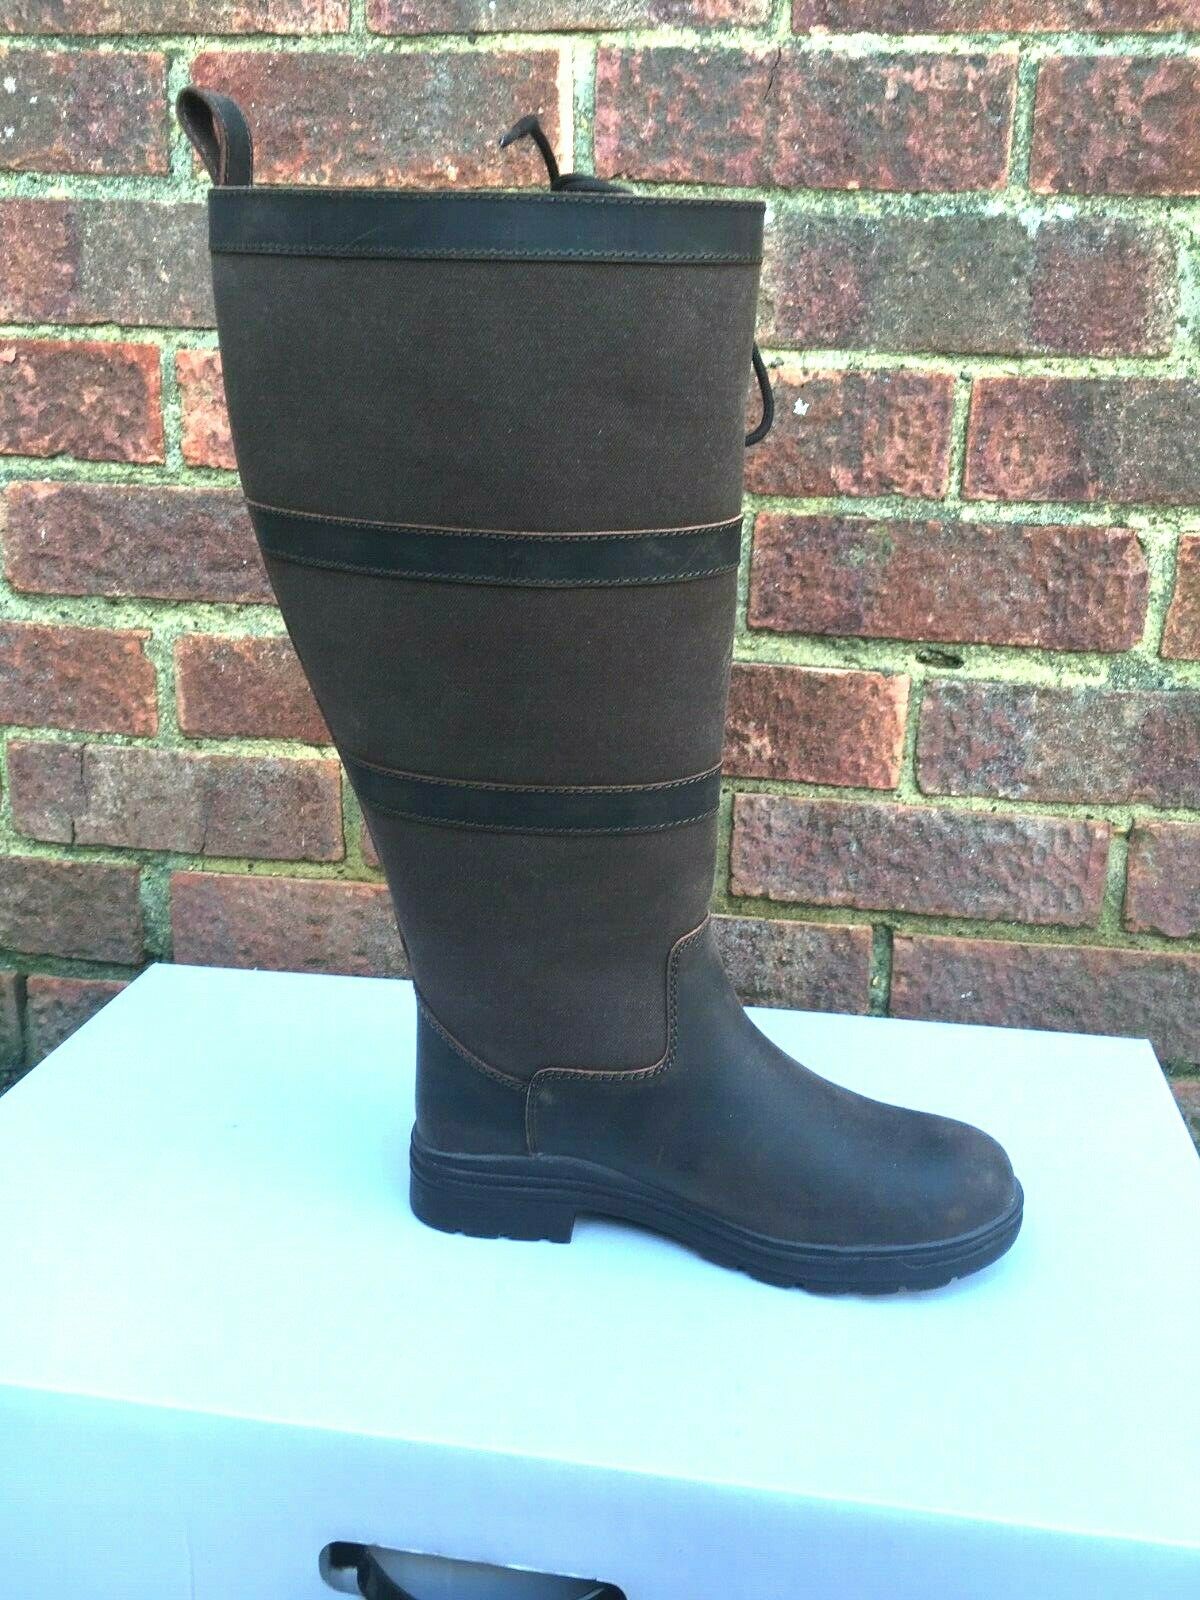 NEW POLESTAR COUNTRY Riding Boots Black  UK 5 EURO 38 SALE PRICE 